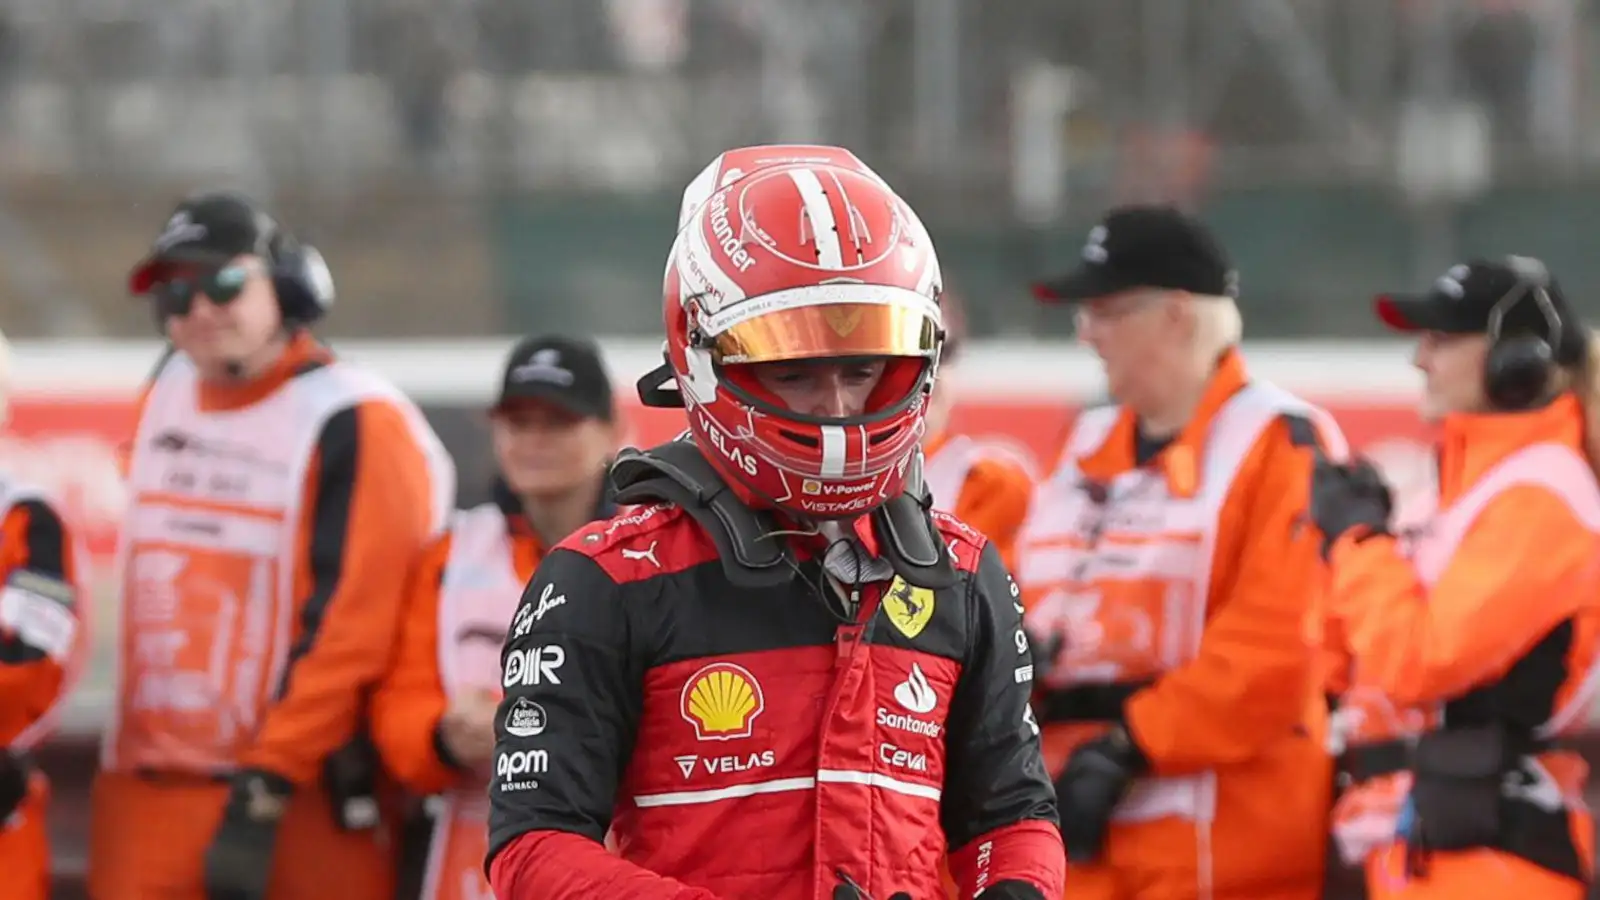 Charles Leclerc after the British Grand Prix, walking past marshals. Silverstone July 2022